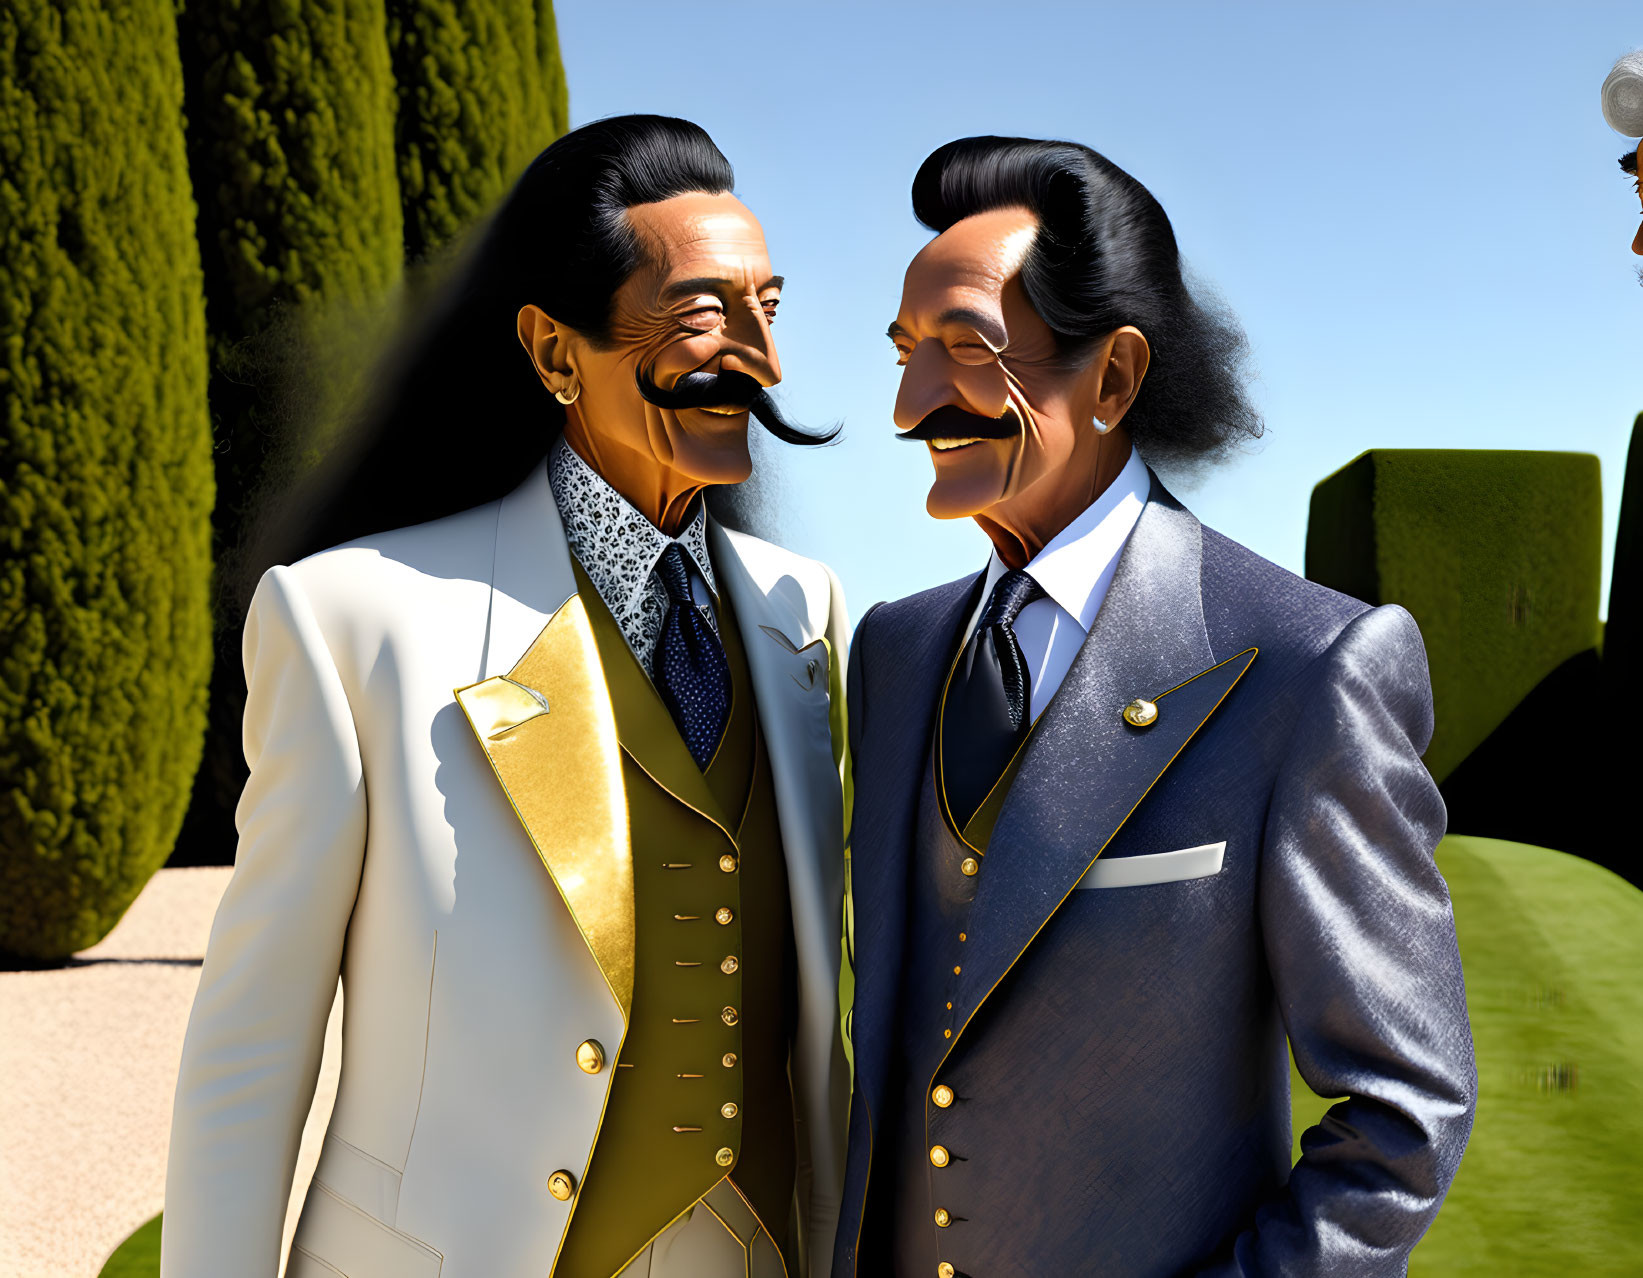 The Dali Brothers 10